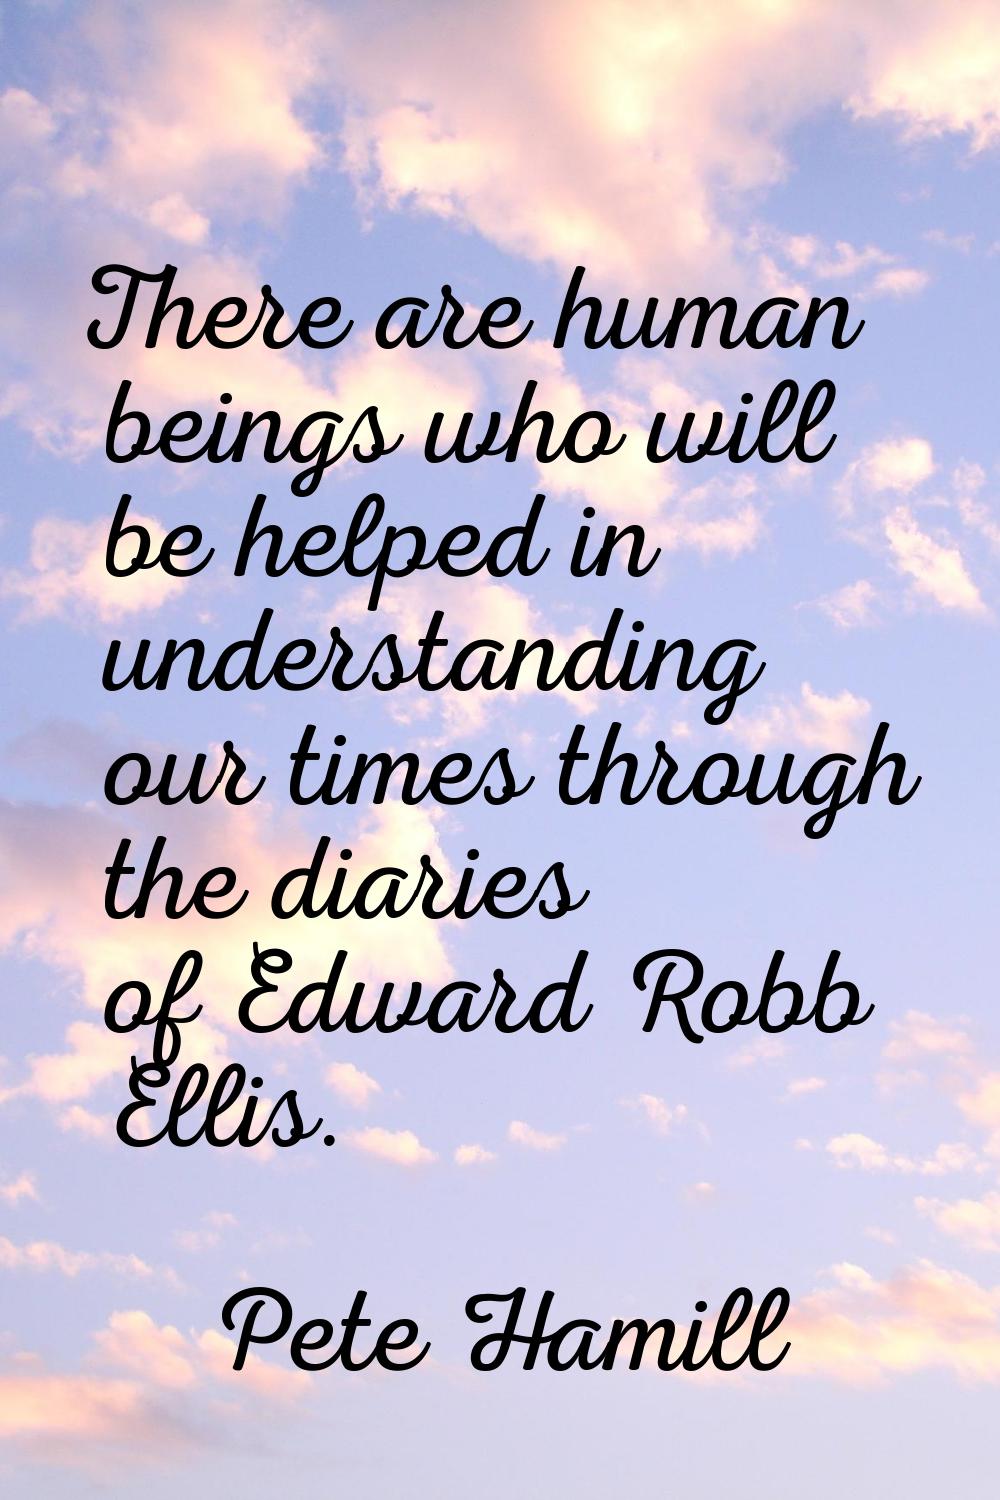 There are human beings who will be helped in understanding our times through the diaries of Edward 